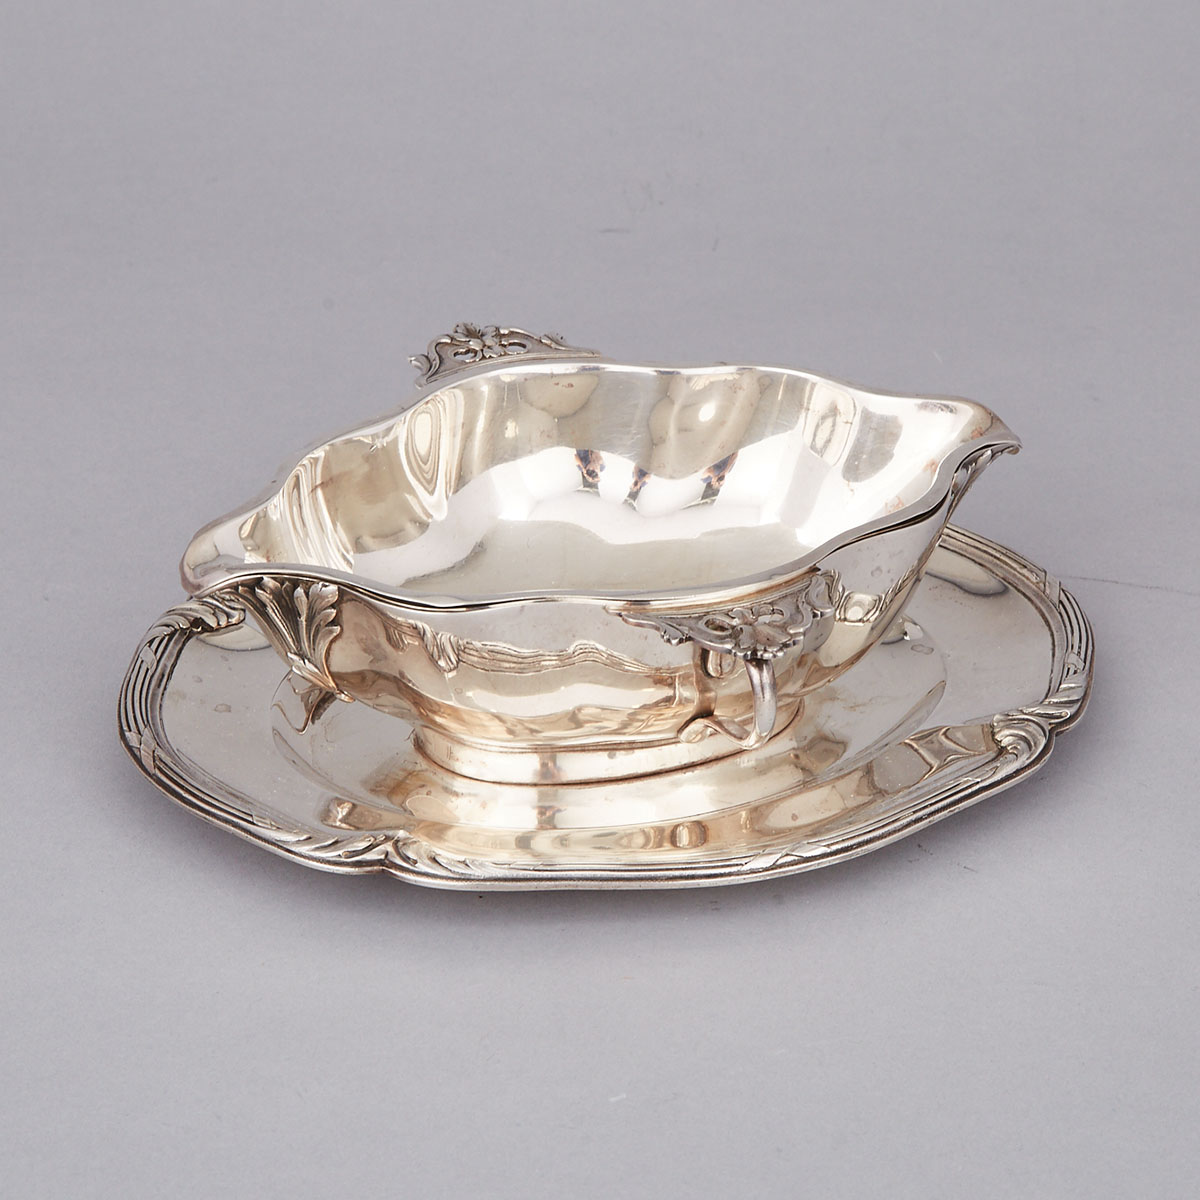 French Silver Two-Handled Sauce Boat, Cardeilhac, Paris, early 20th century